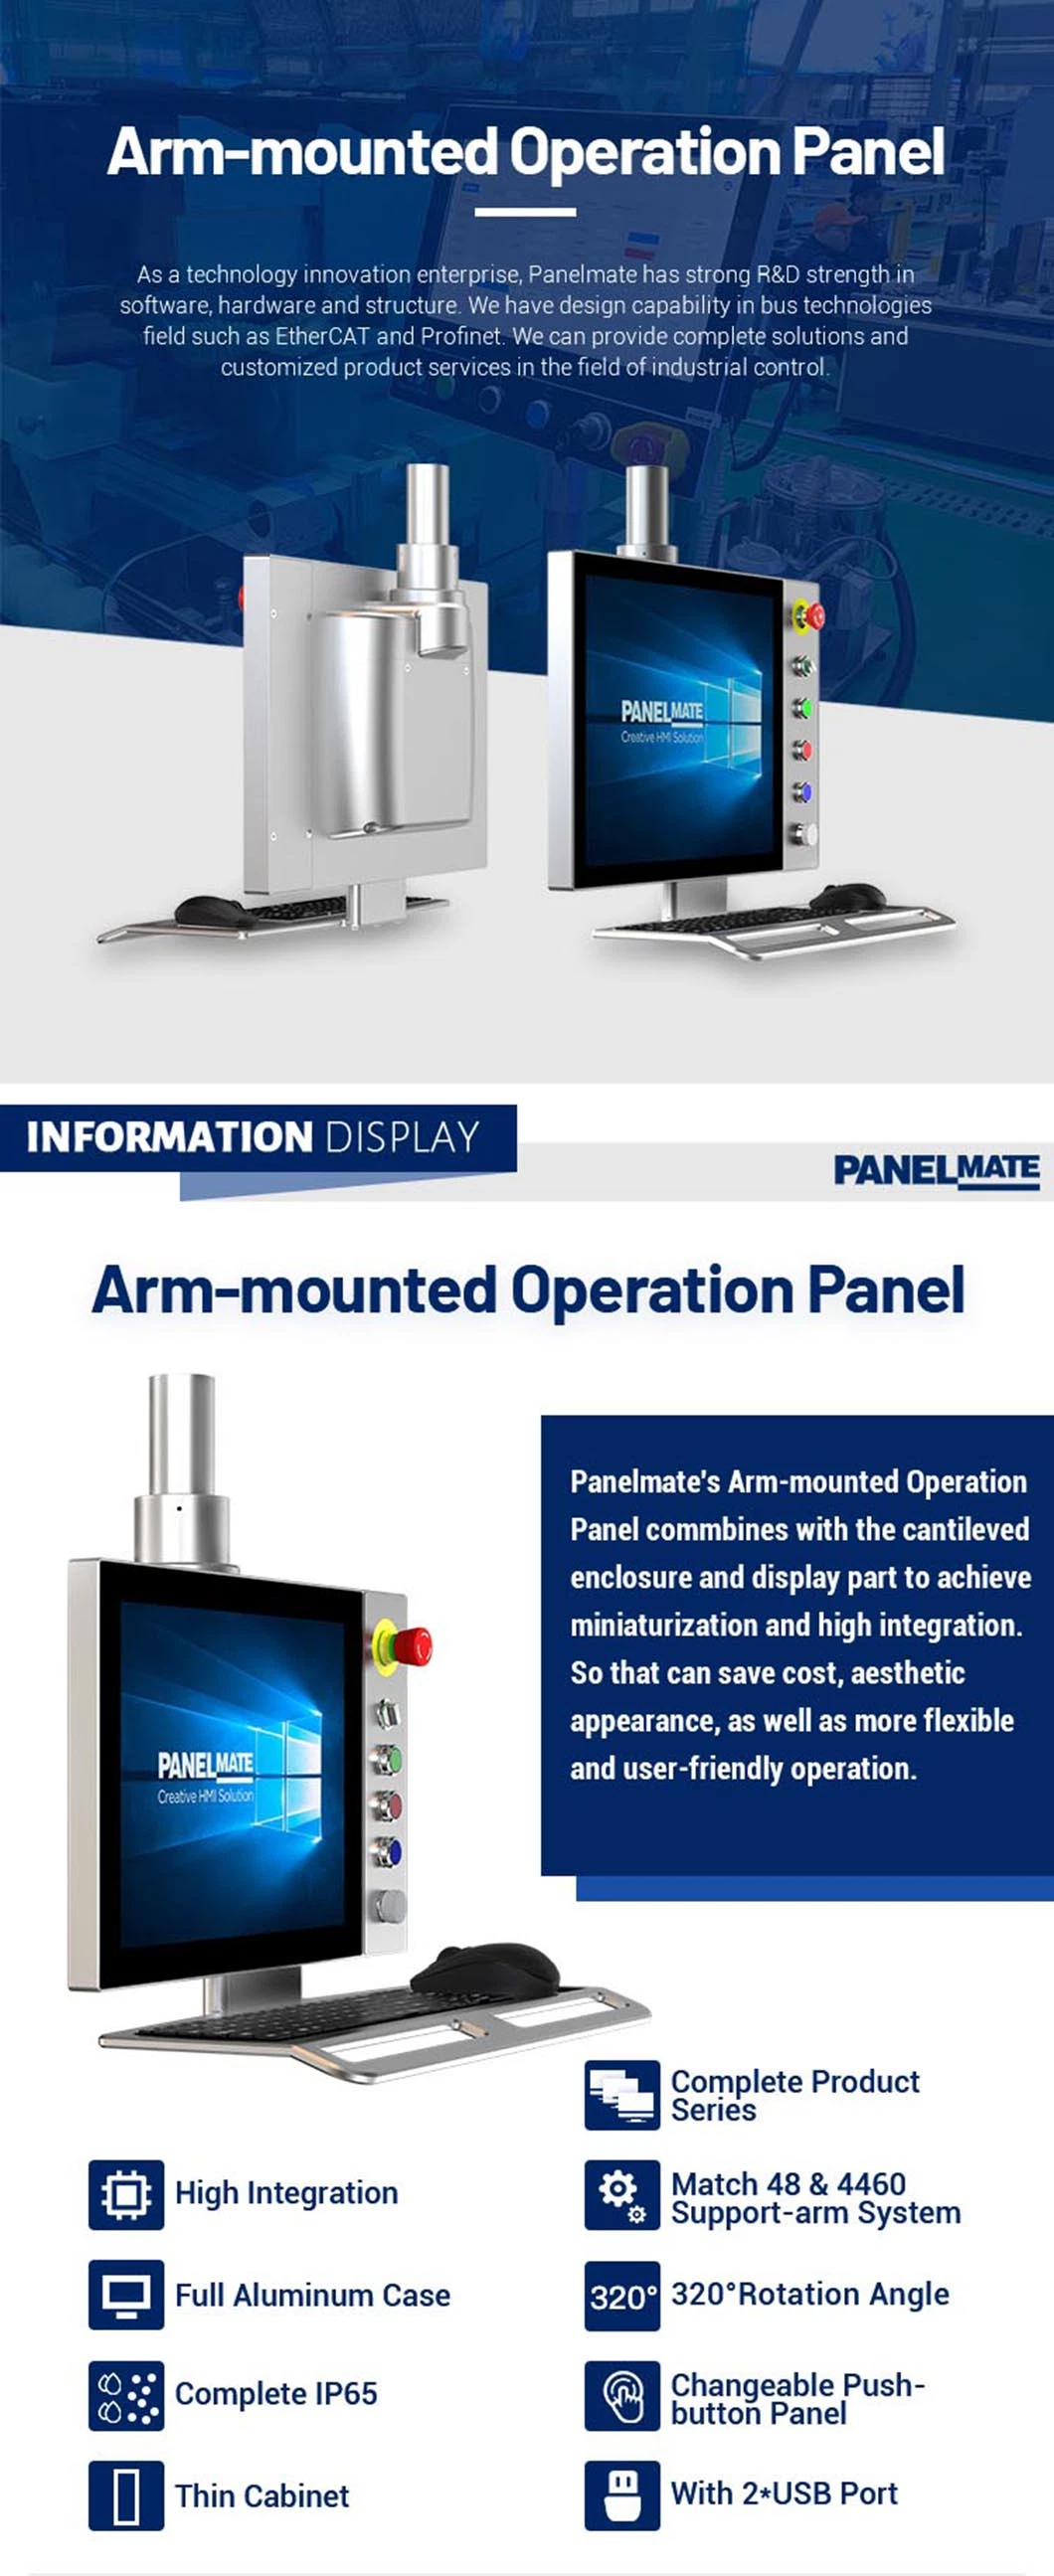 19 Inch Industrial Operation Panel HMI Cantilever Enclosure Supported Arm System Capacitive Touch Screen LCD Display IP65 Waterproof Dustproof Monitor